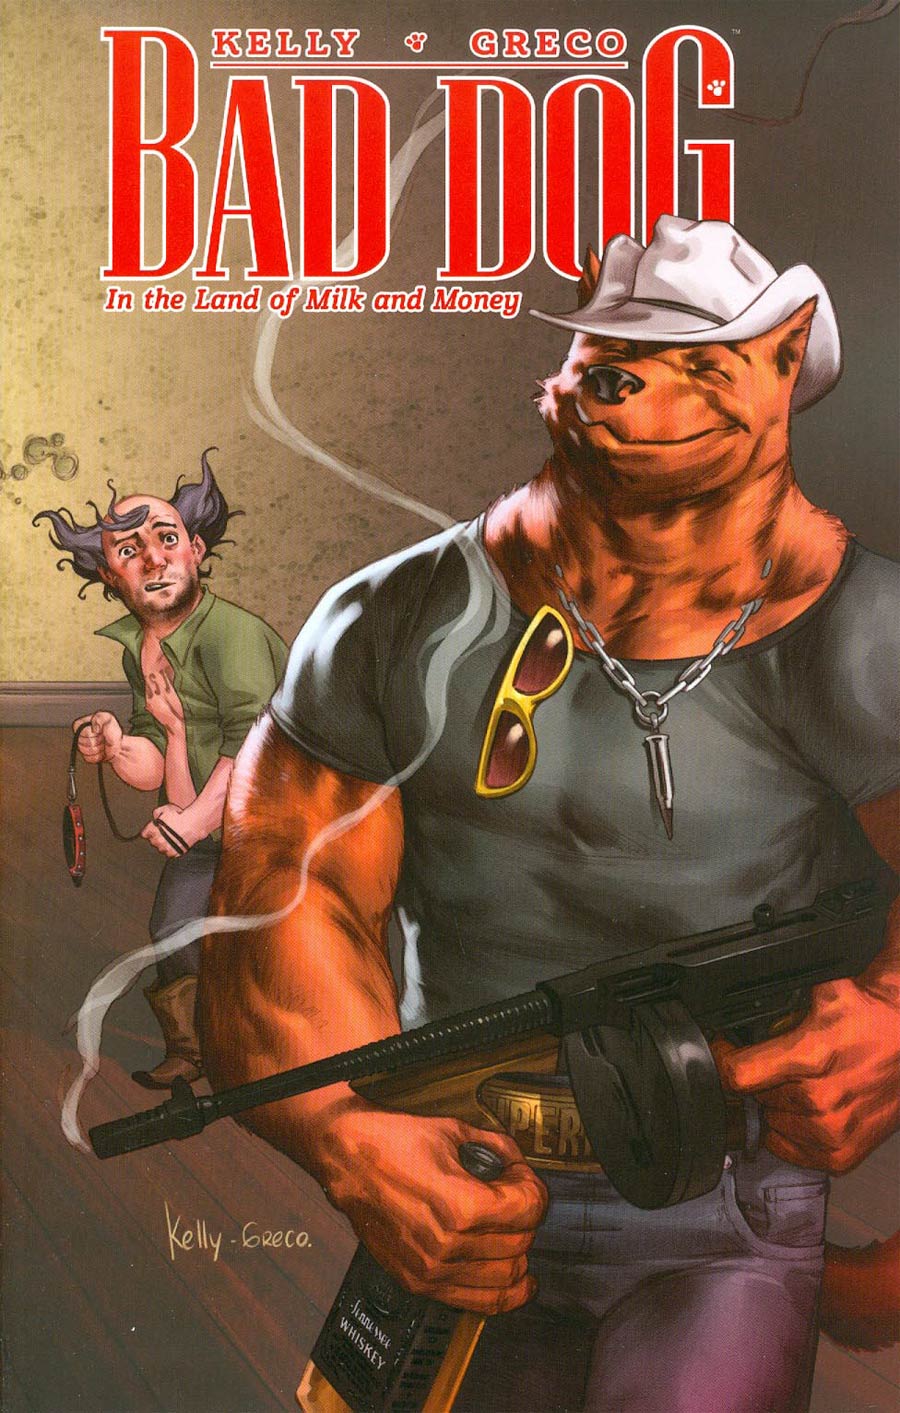 Bad Dog Vol 1 In The Land Of Milk And Honey TP